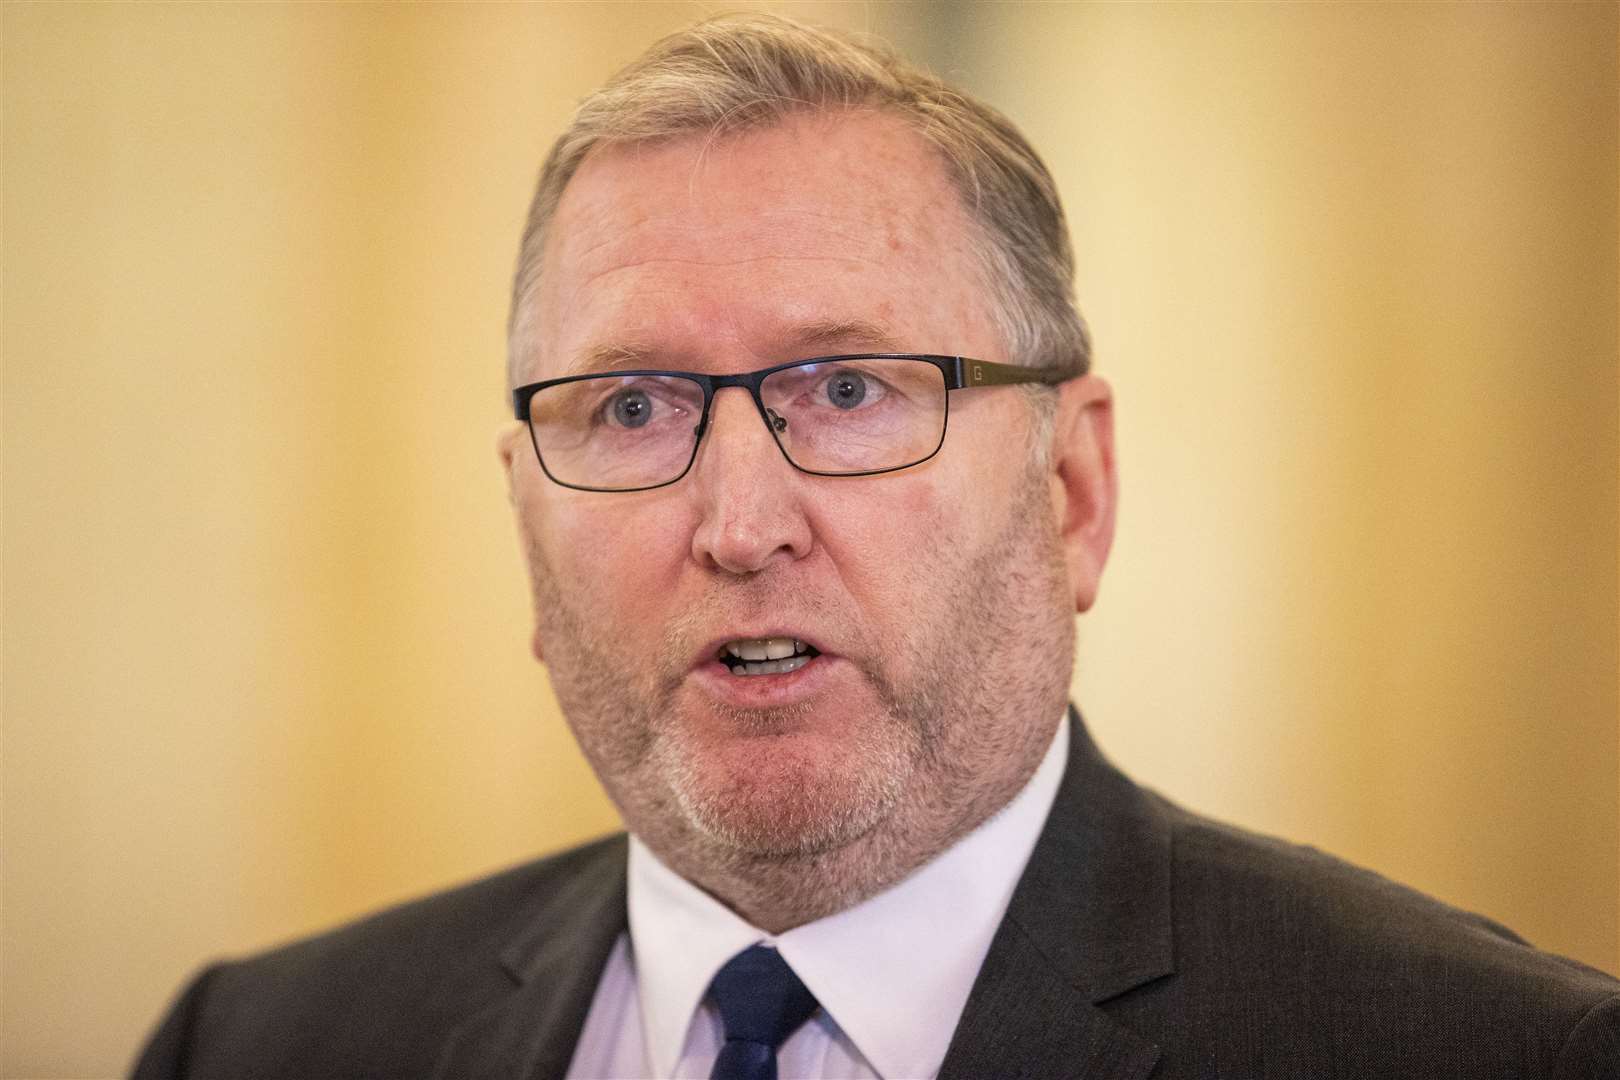 UUP leader Doug Beattie said abortion services now had to be delivered (Liam McBurney/PA)